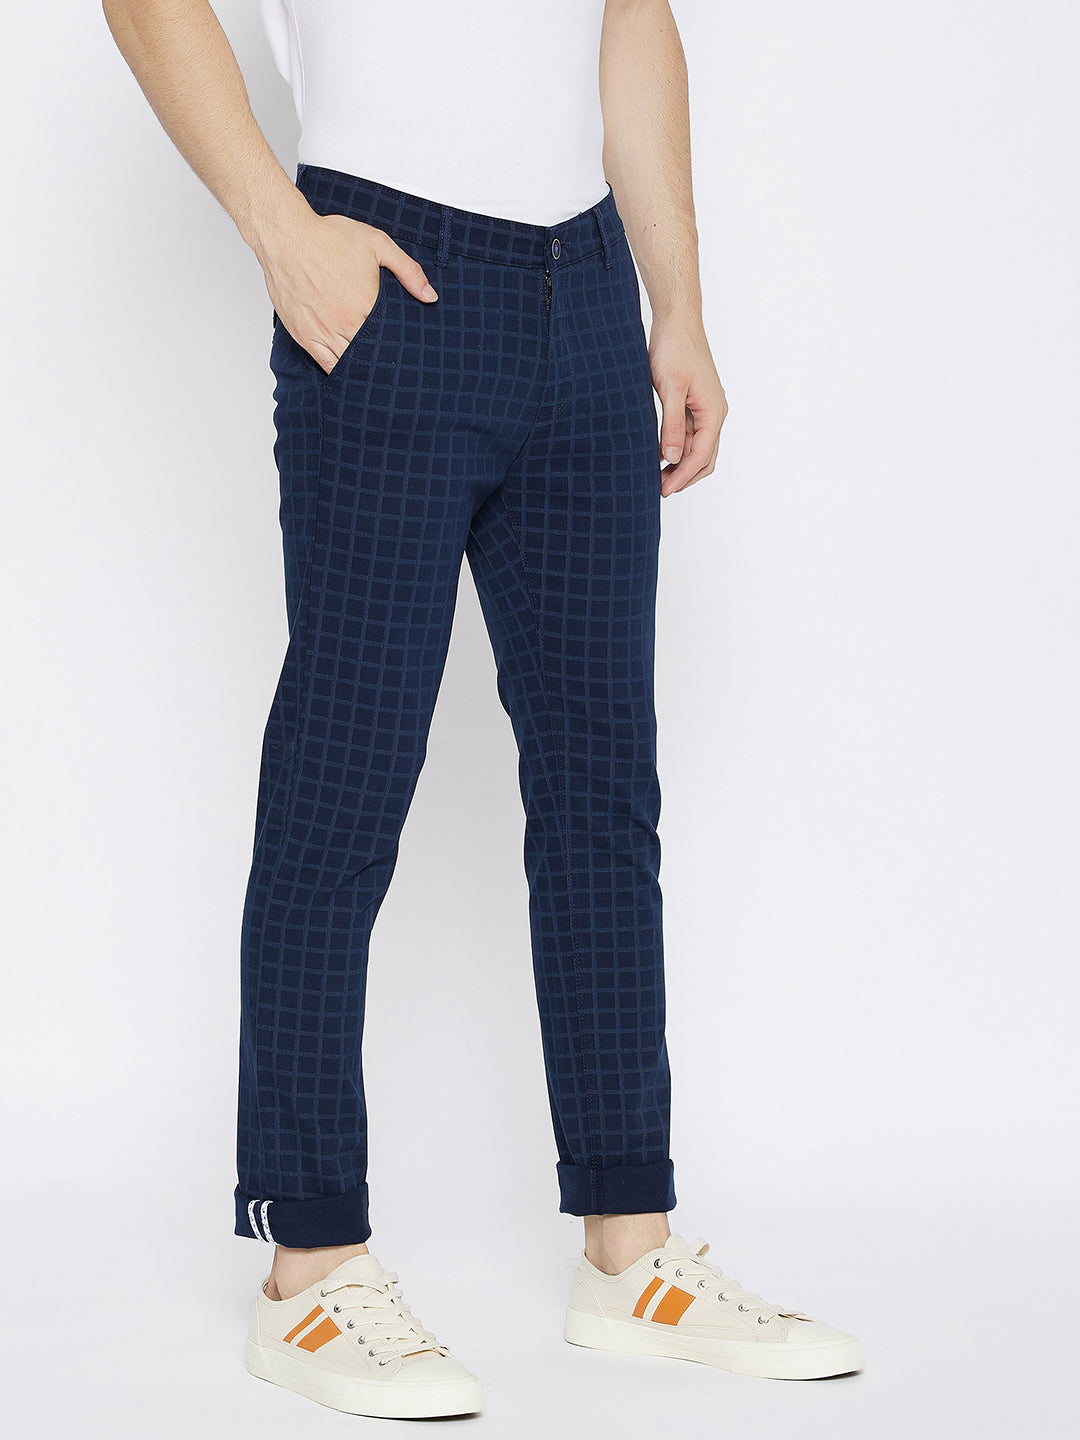 Blue Checked Slim Fit Trousers - Men Trousers